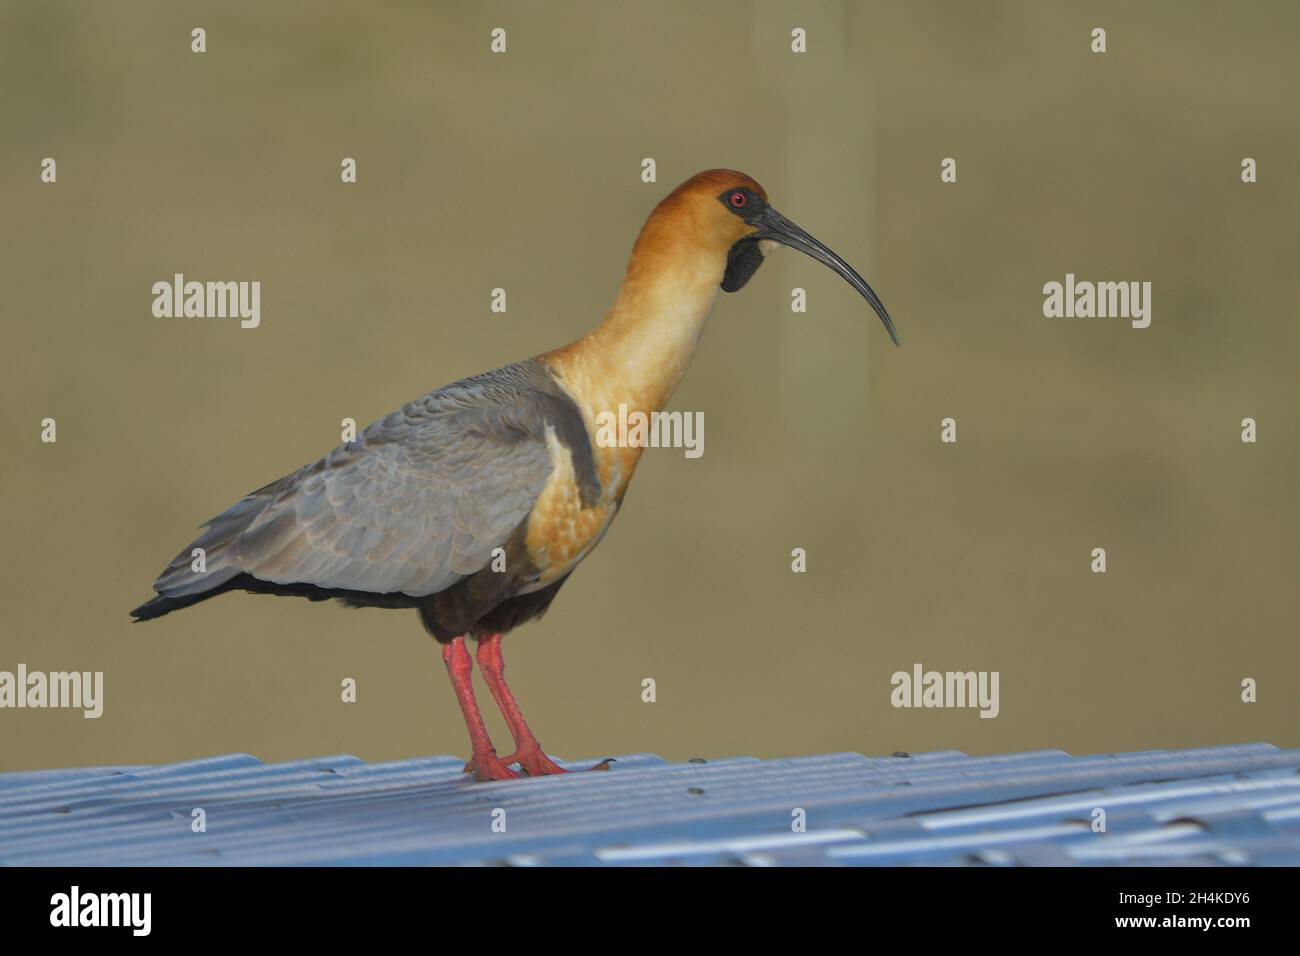 Theristicus melanopis - The southern bandurria is a species of pelecaniform bird in the Threskiornithidae family. Stock Photo